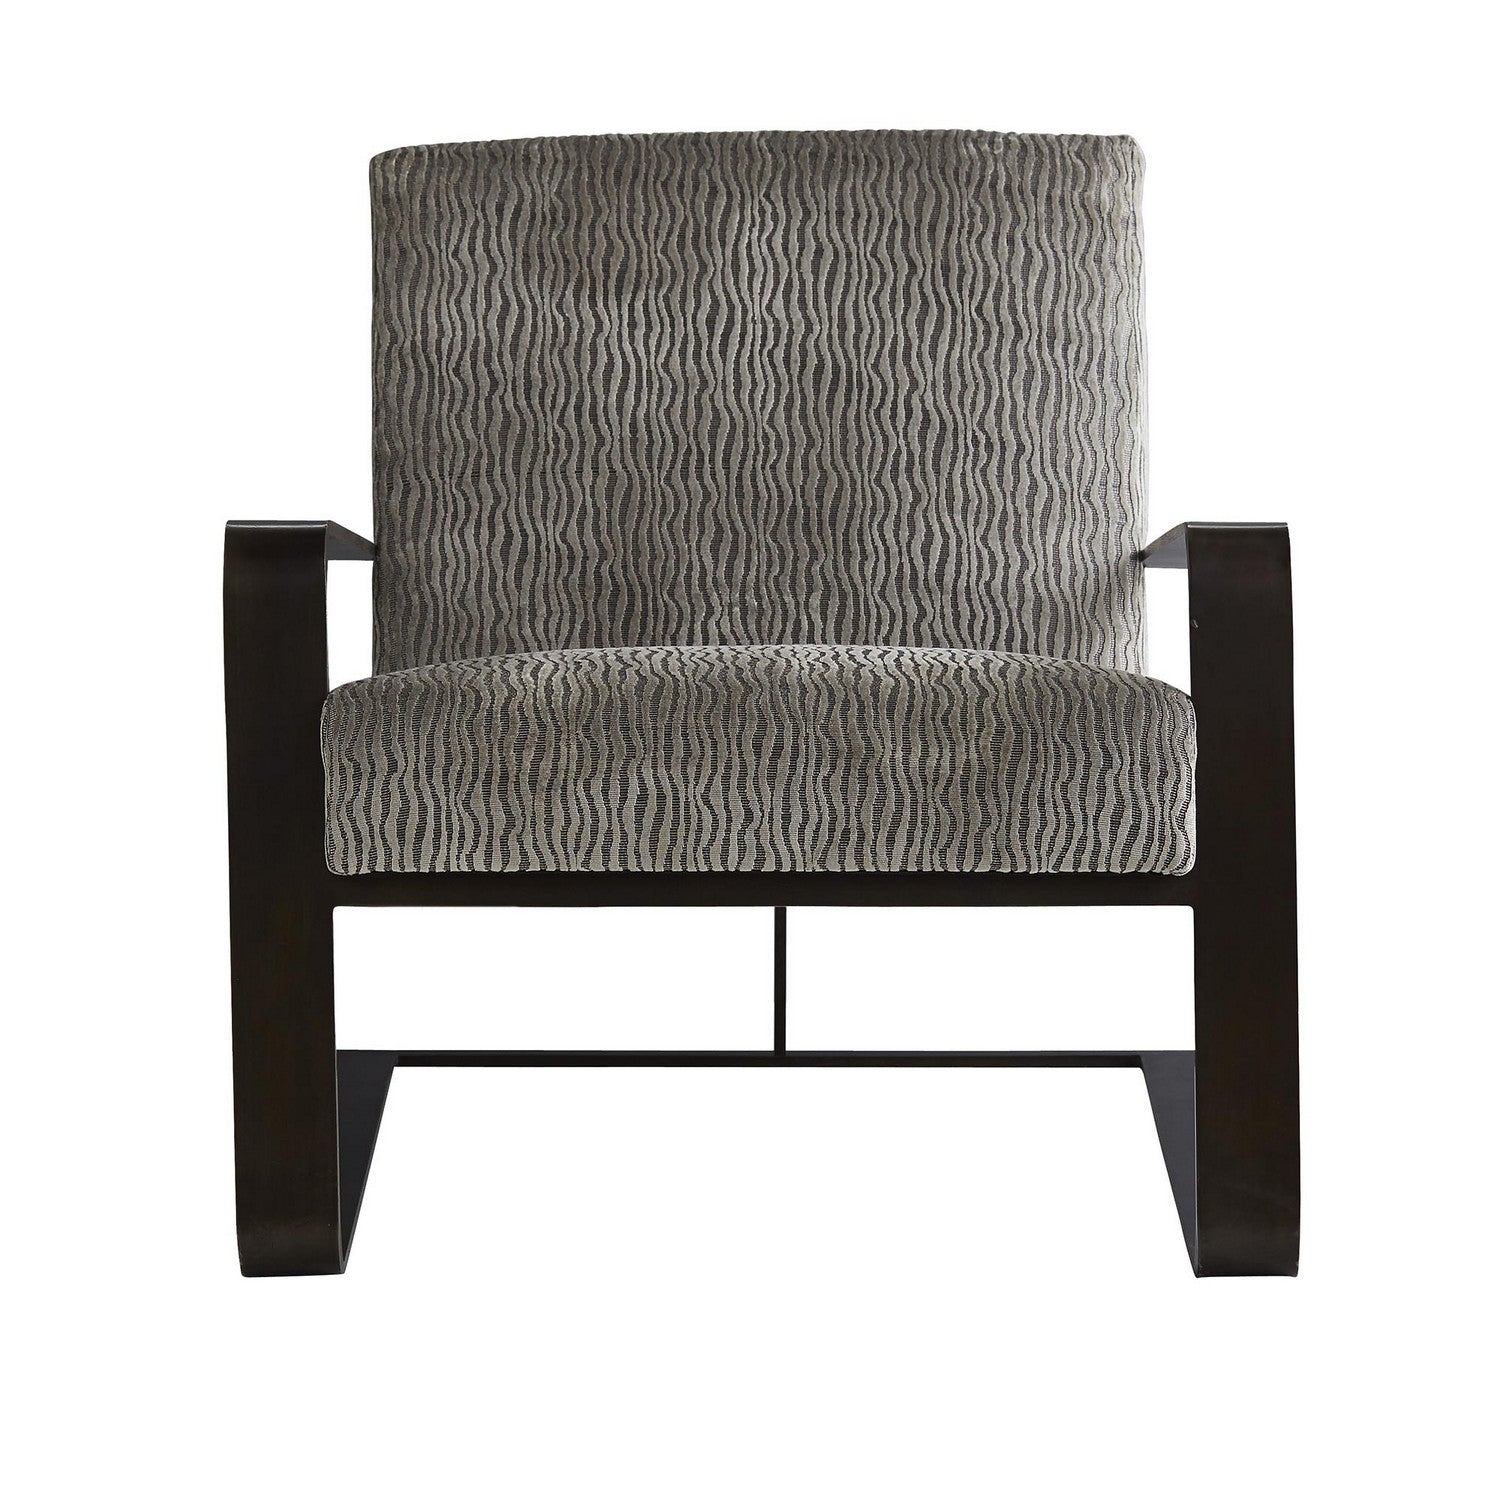 Chair from the Torcello collection in Lichen finish